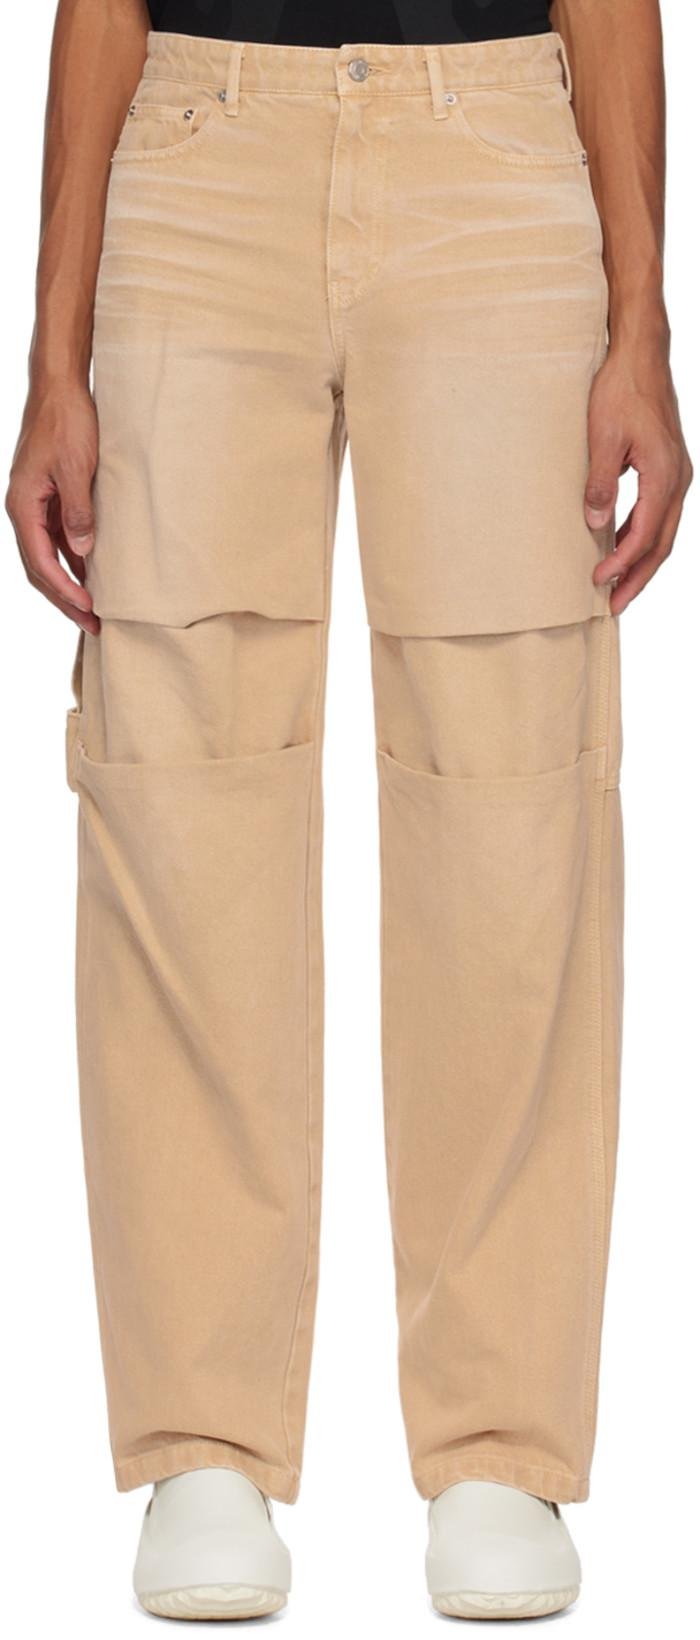 Tan Wide-Leg Denim Trousers by WE11DONE | jellibeans